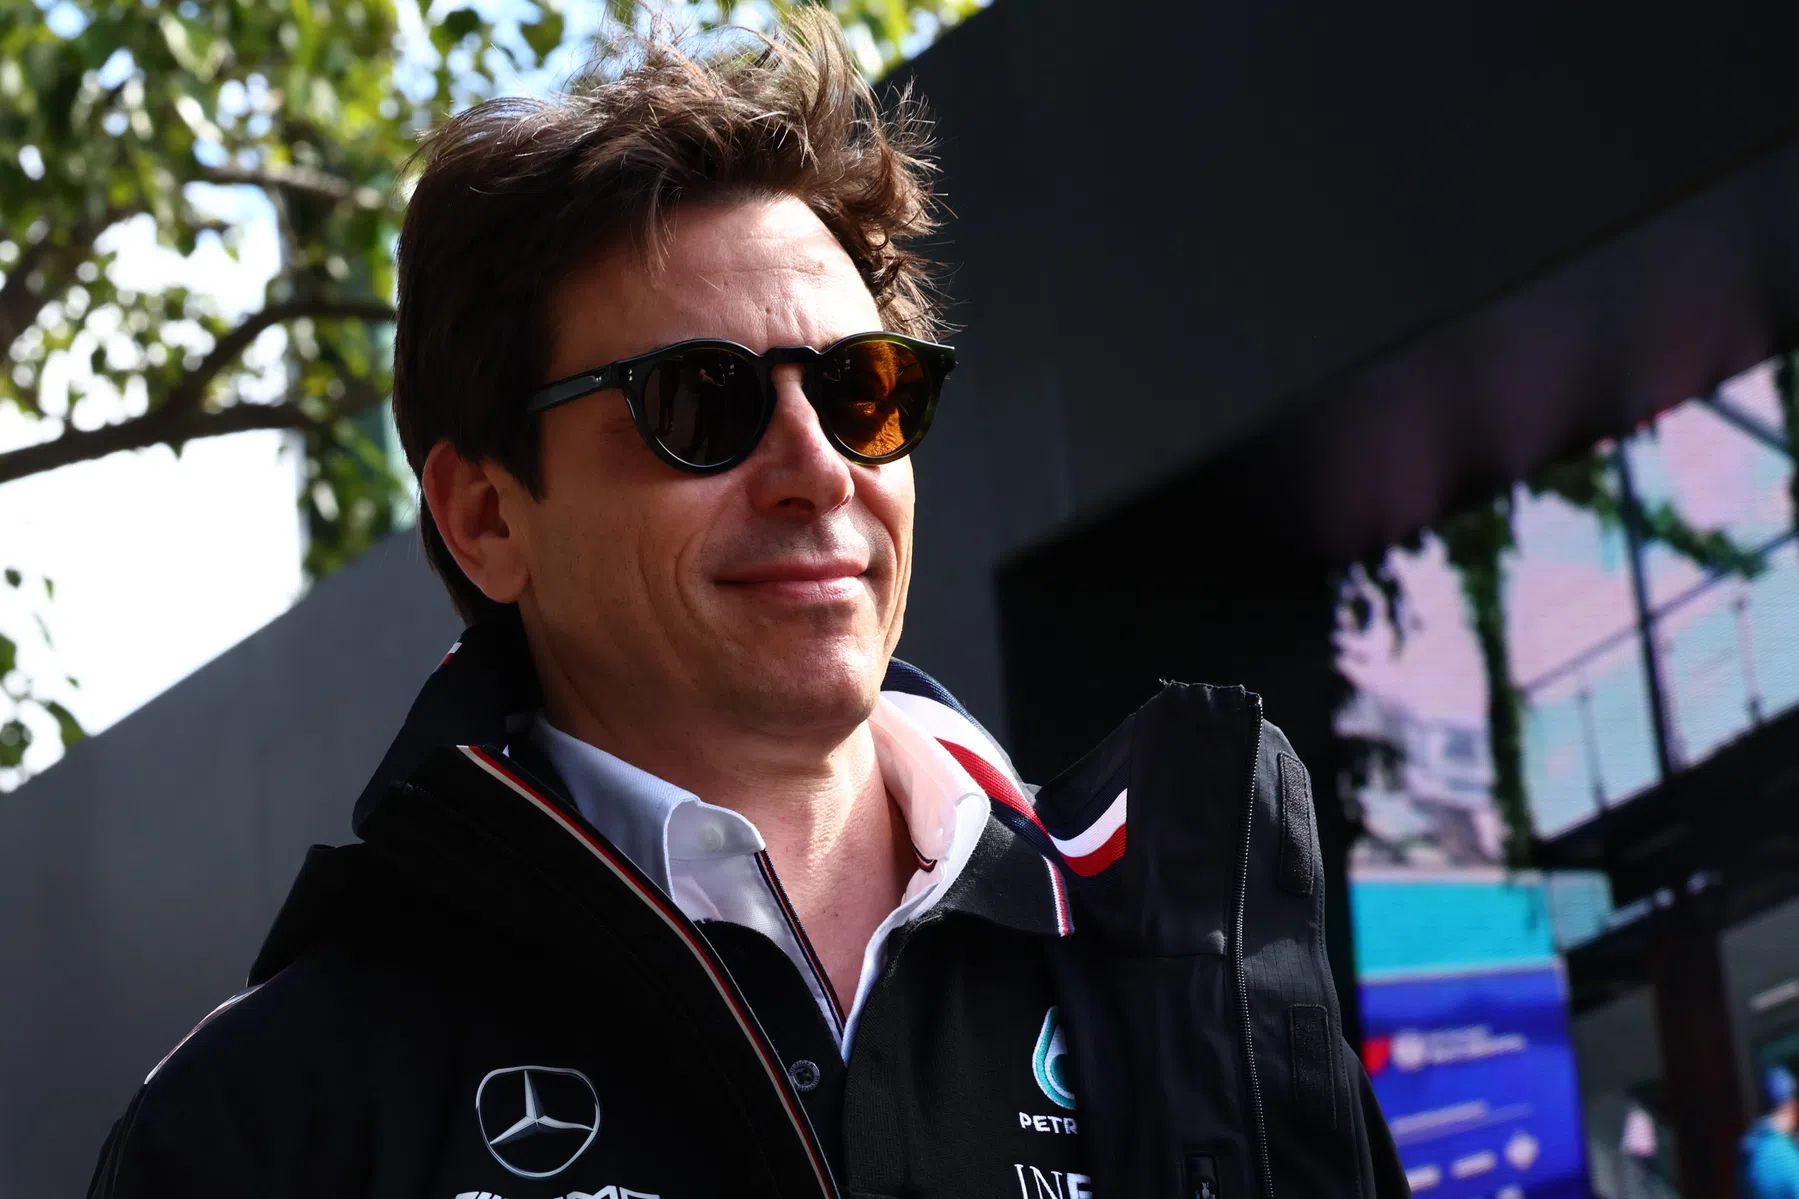 Toto Wolff business assets and salary